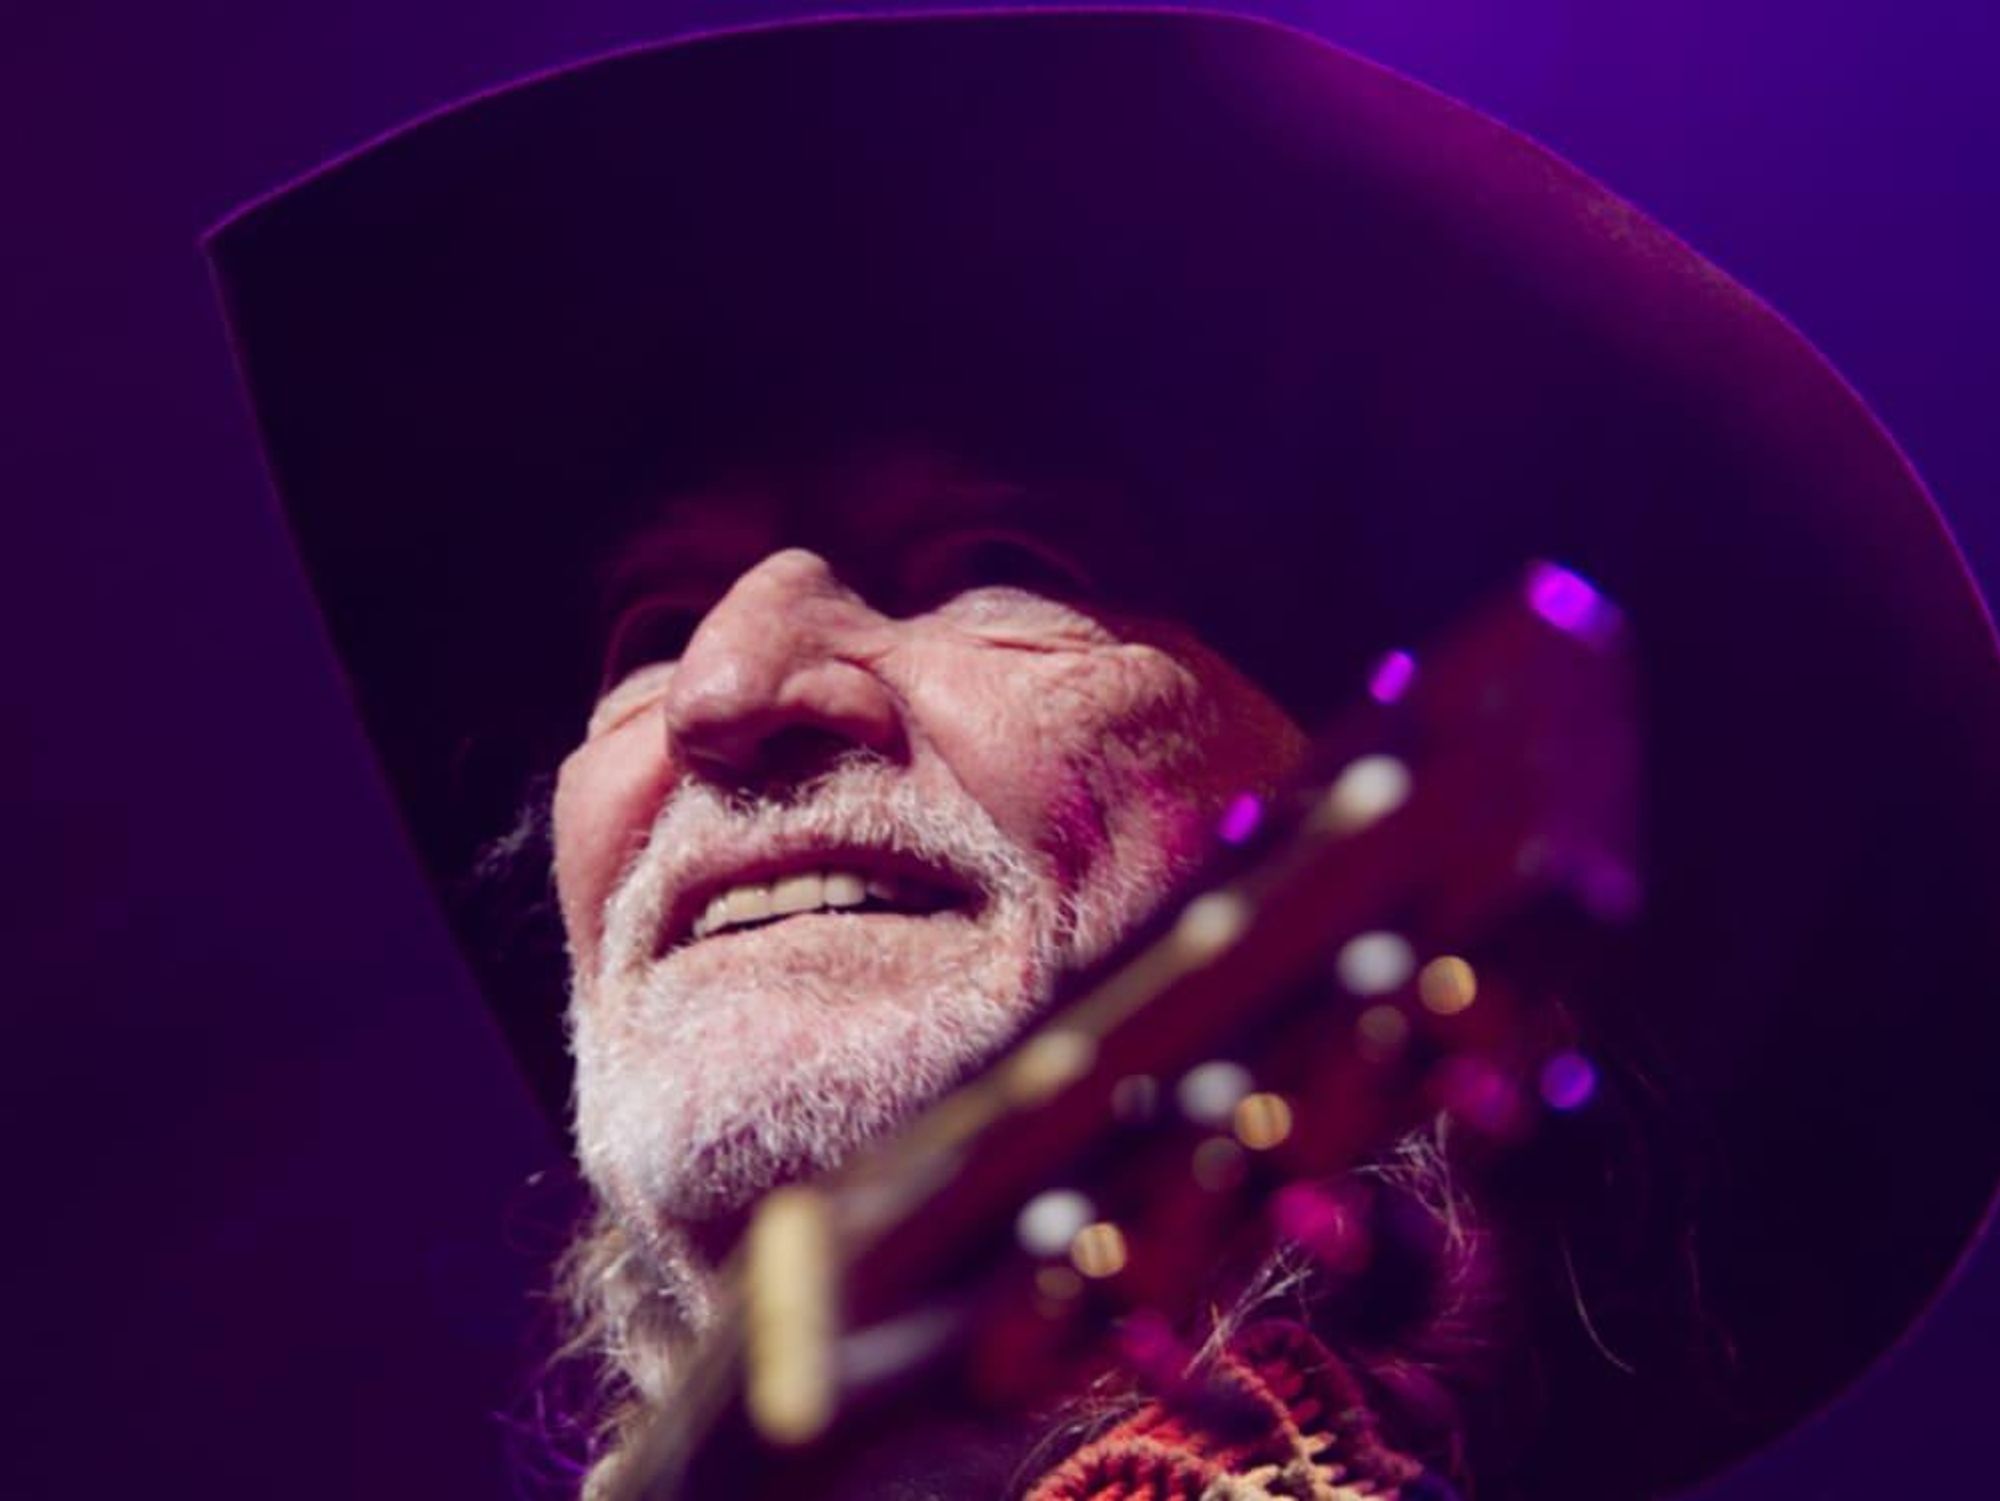 News_Rick Kern_willie nelson_new years eve_acl_jan 2012_willie nelson CROPPED